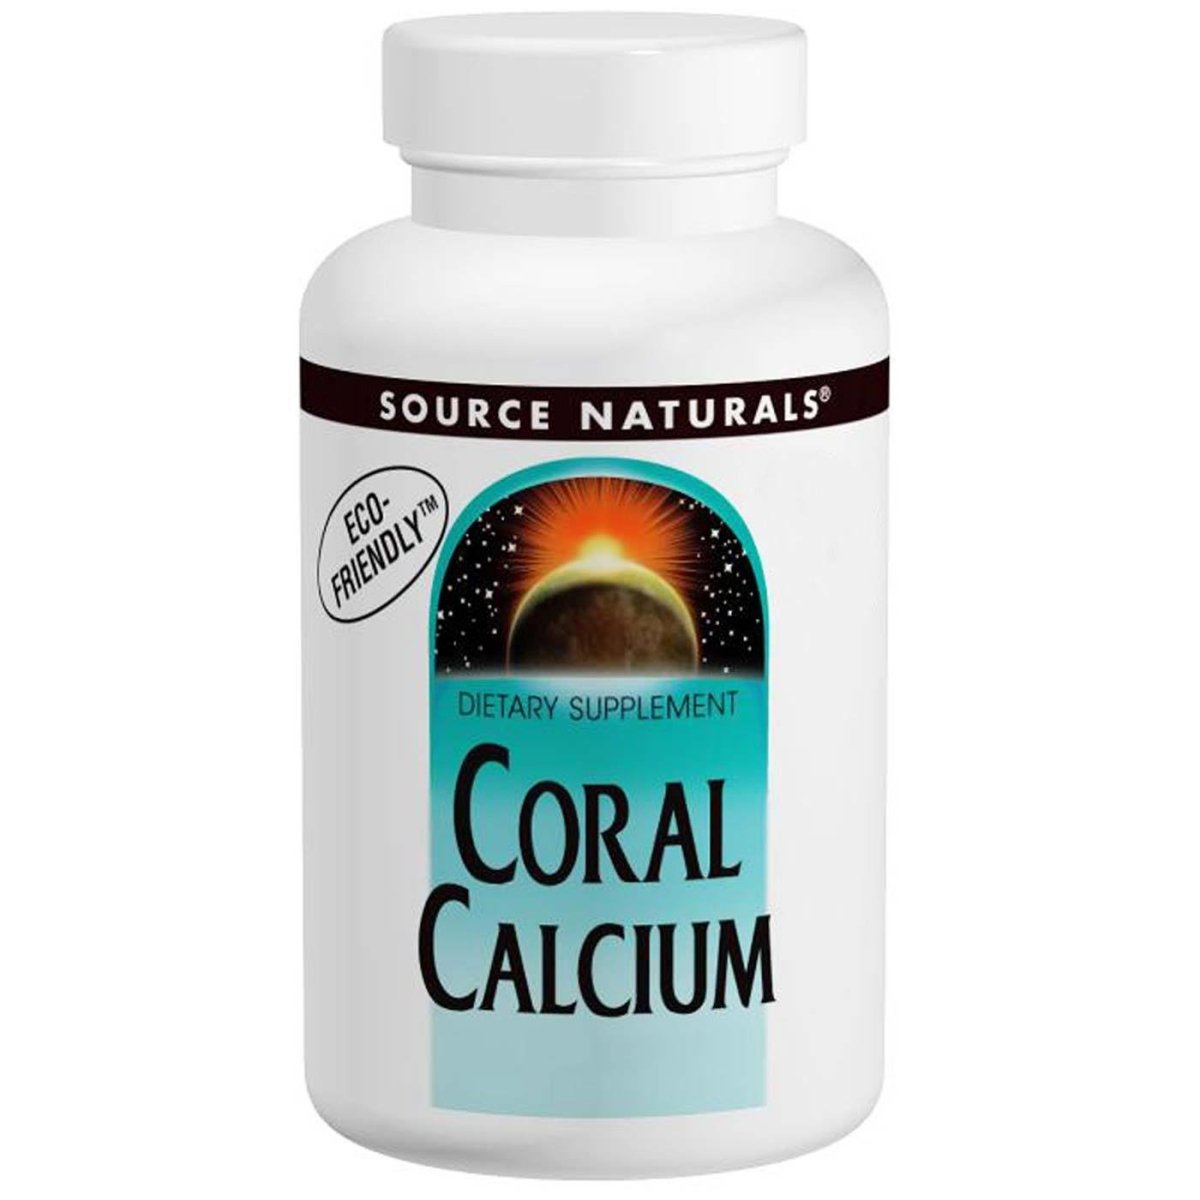 Coral Calcium - 1200mg - 30 Tablets